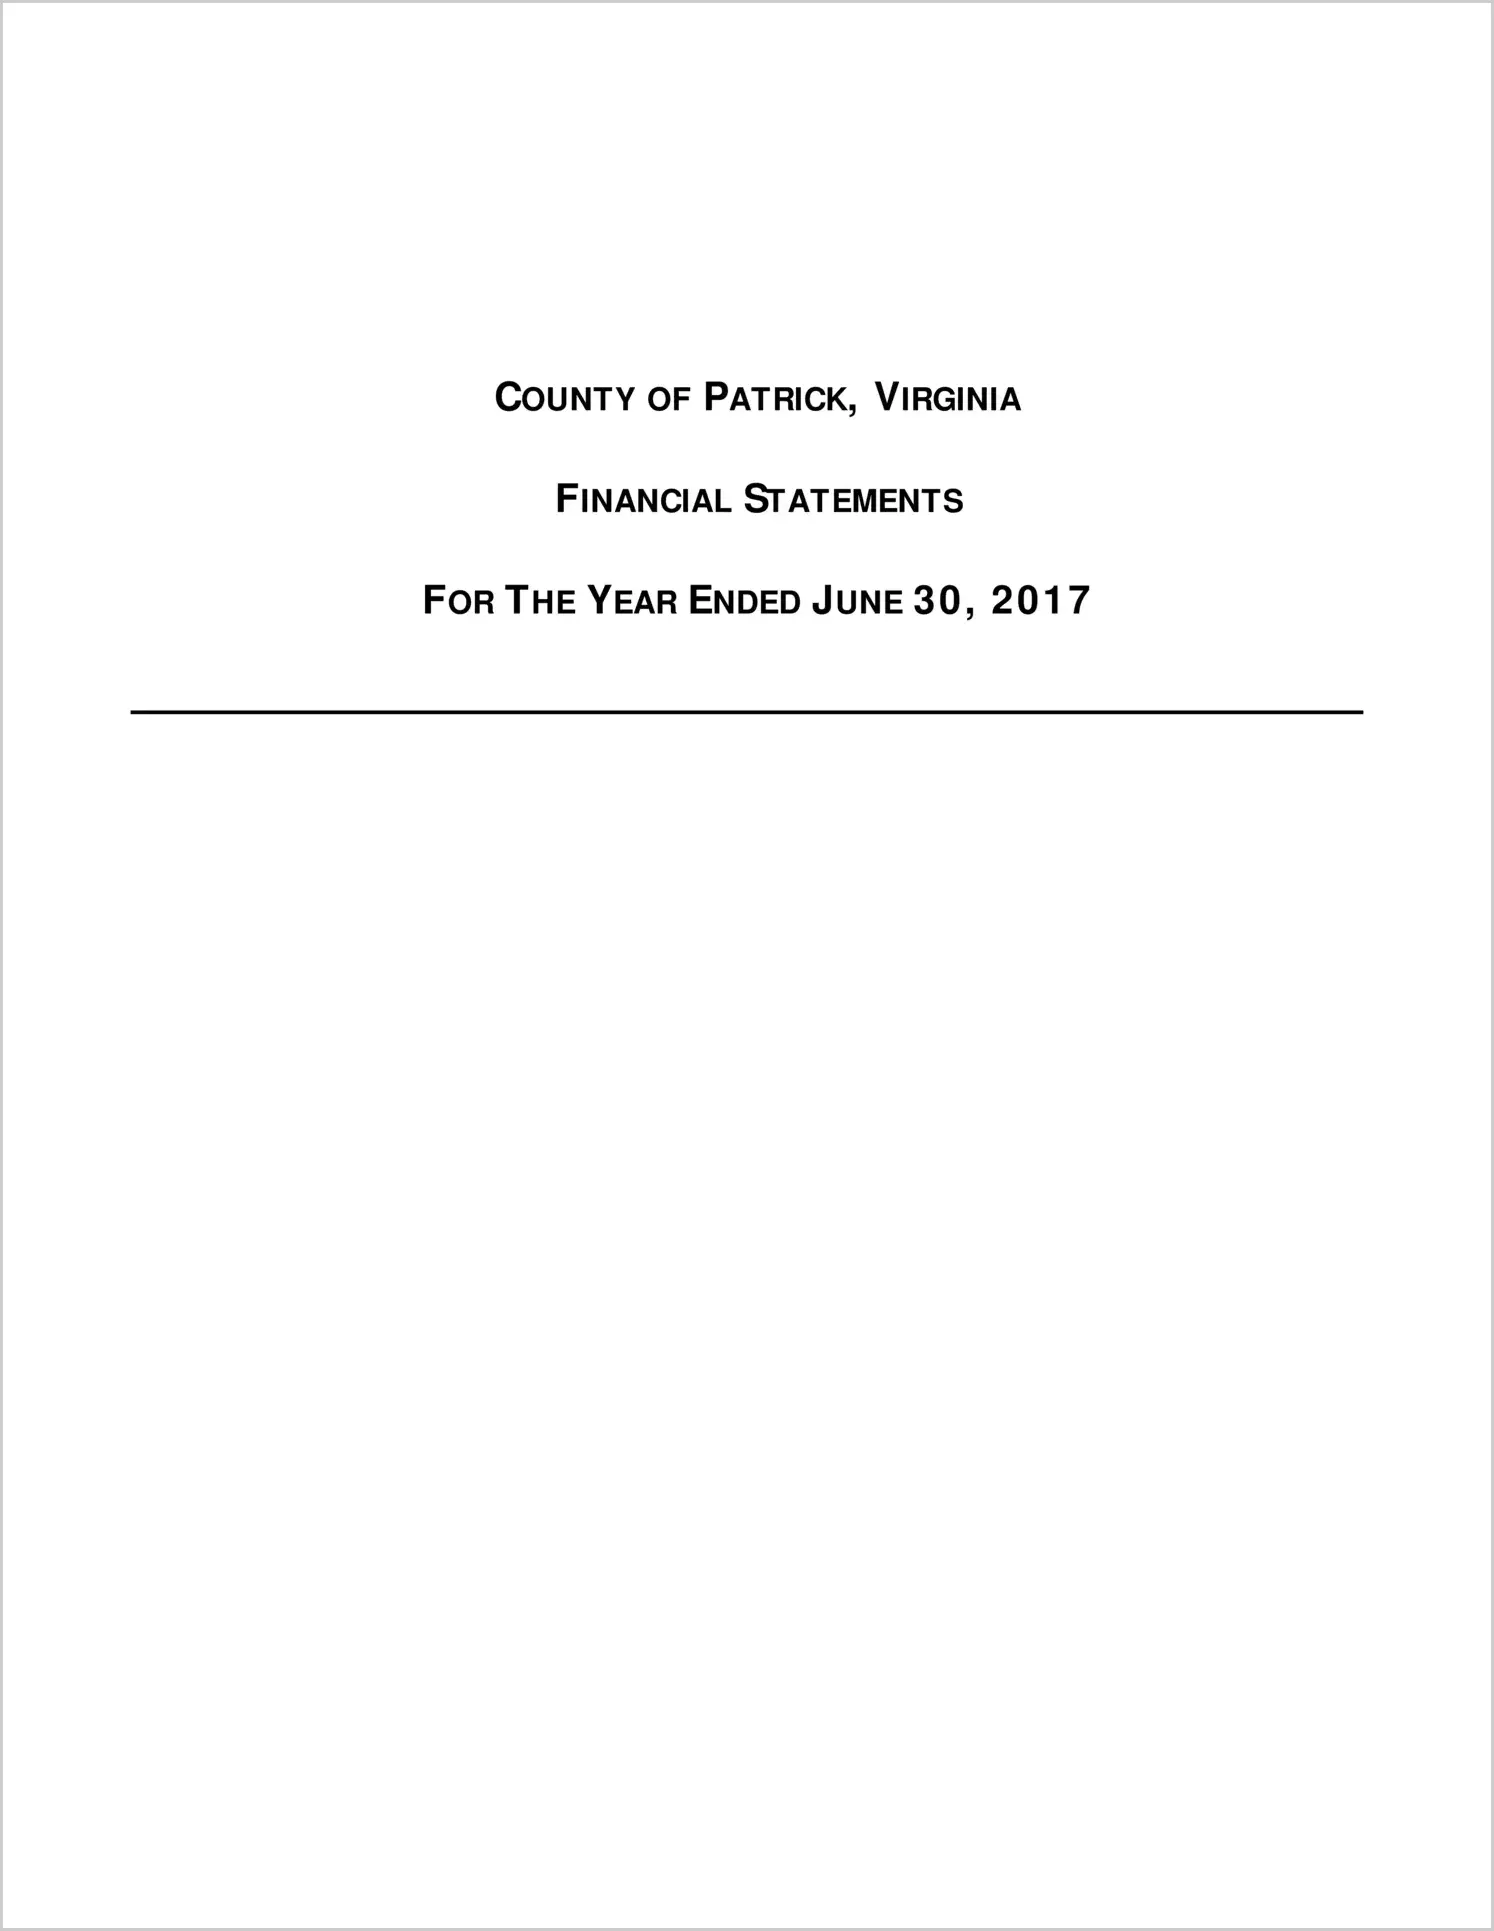 2017 Annual Financial Report for County of Patrick